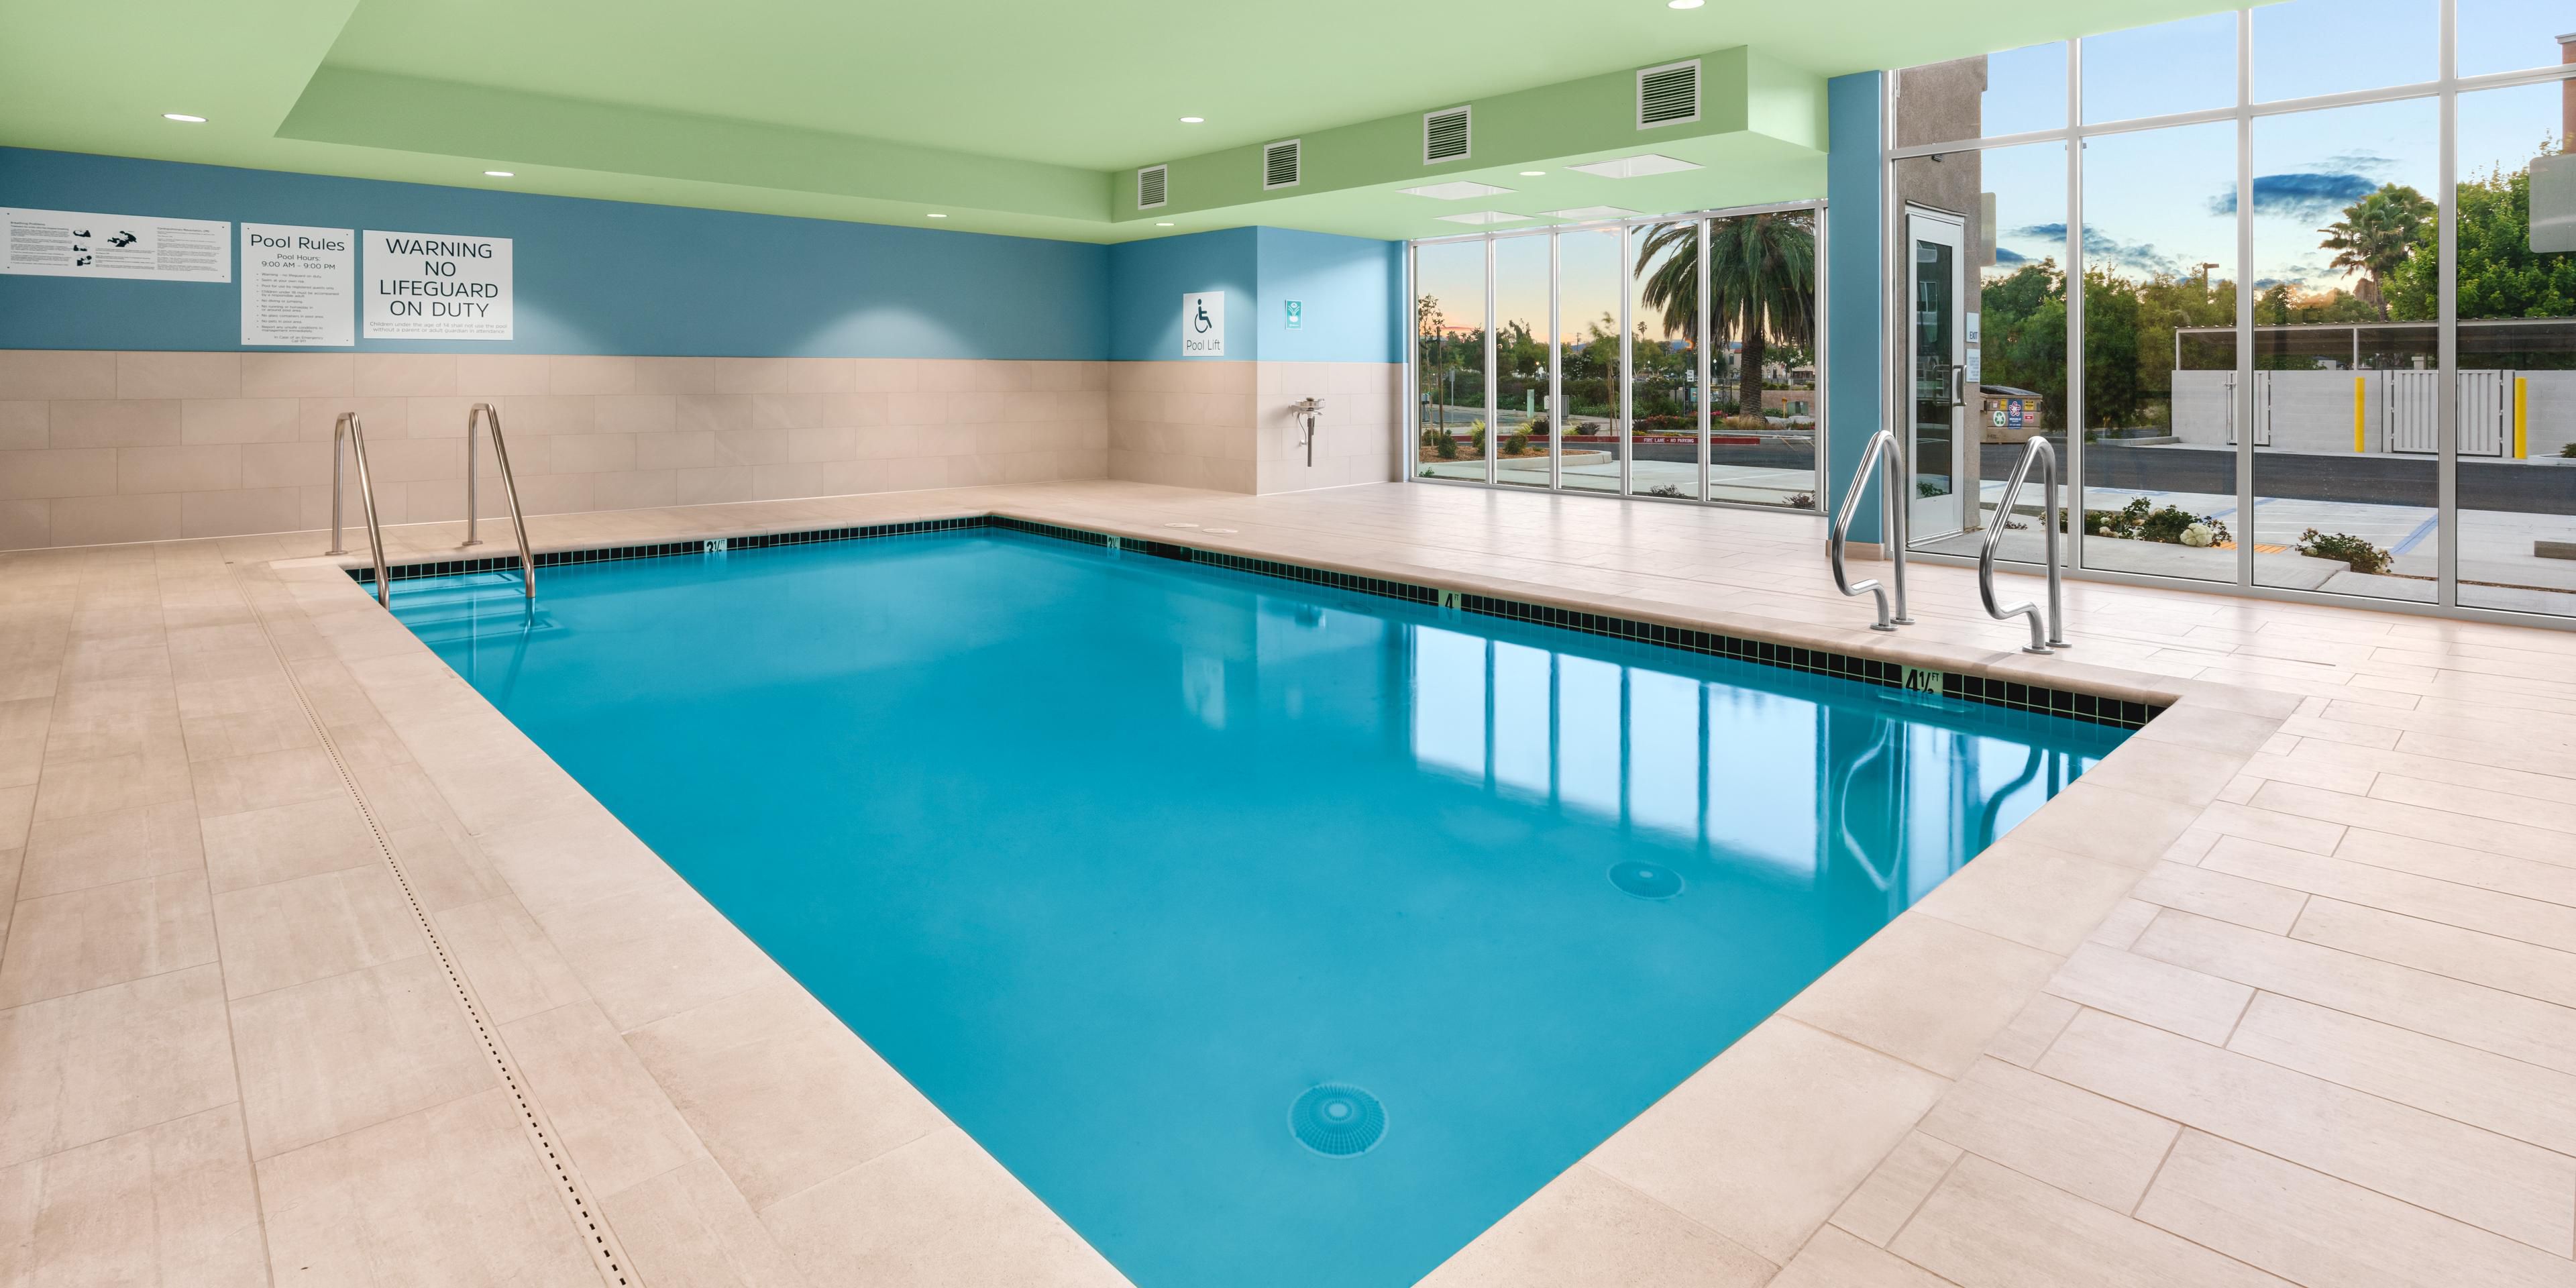 Families will love our indoor heated pool that is available year-round at our Suisun City hotel, open daily from 10am-8pm. Don't miss your workout routine with our Fitness Center that's open daily from 6am-10pm. Looking to explore outdoors? Rockville Hills Regional Park is just 6.1 miles from us.